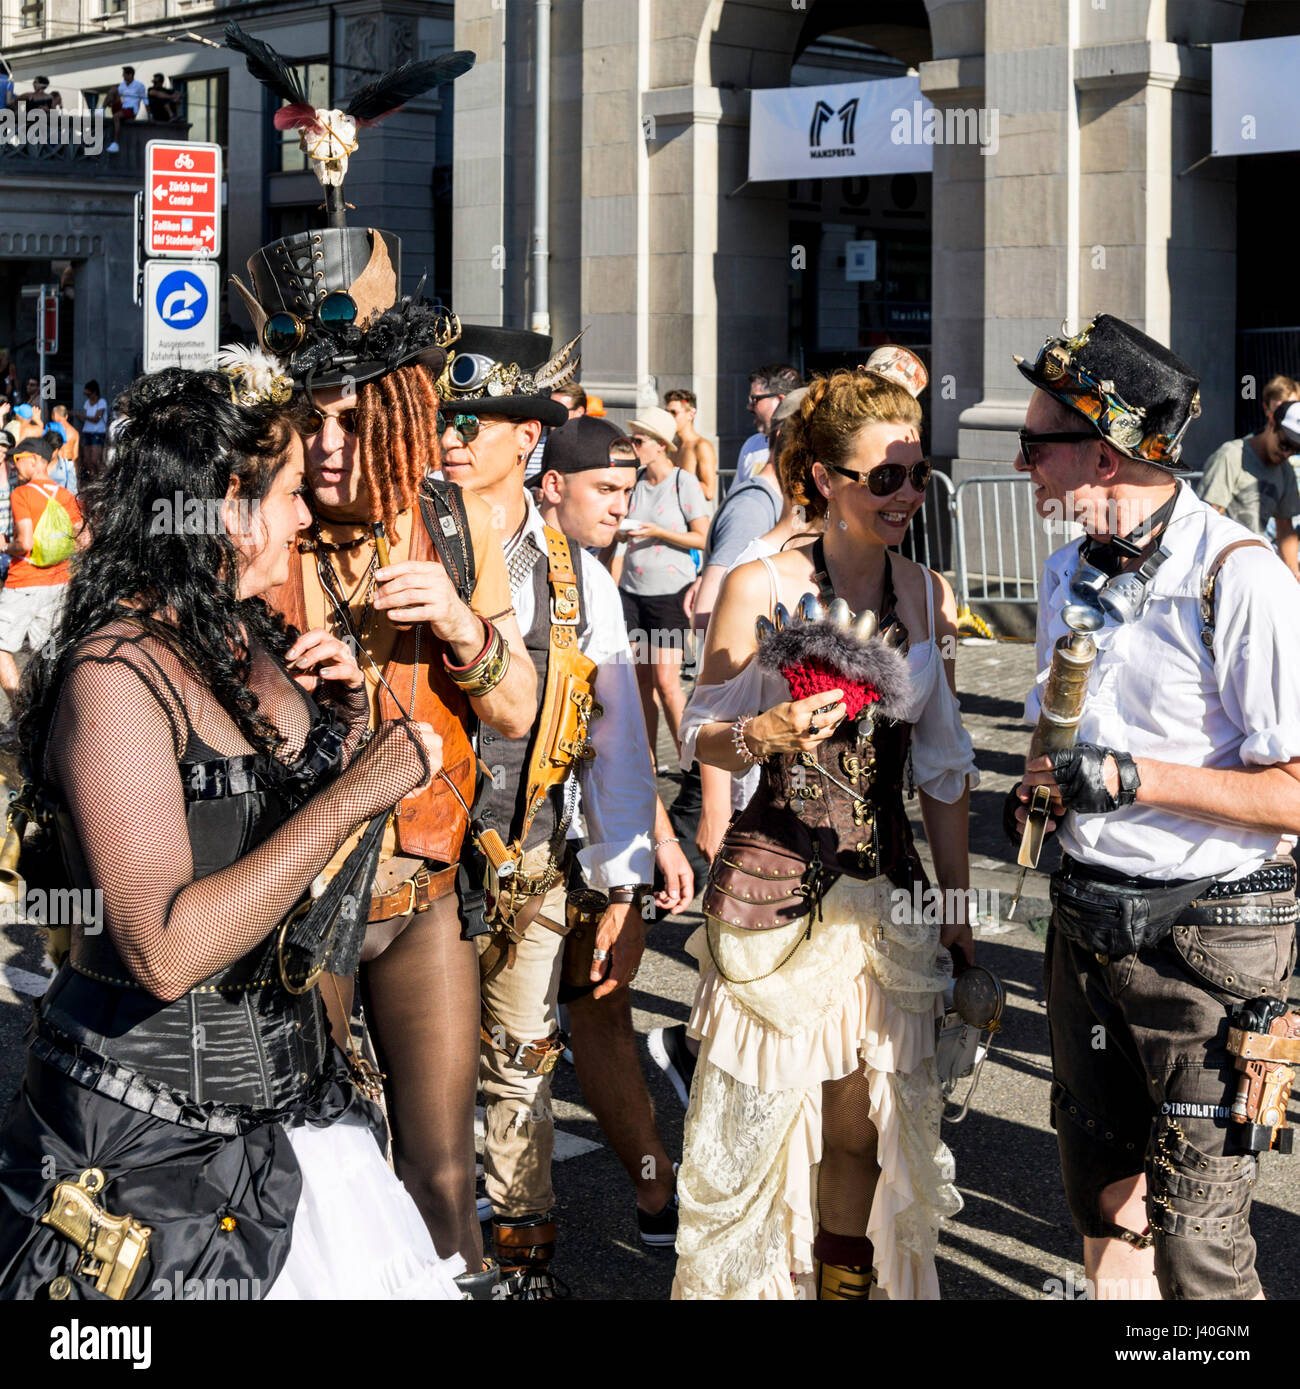 Strassenfest High Resolution Stock Photography and Images - Alamy